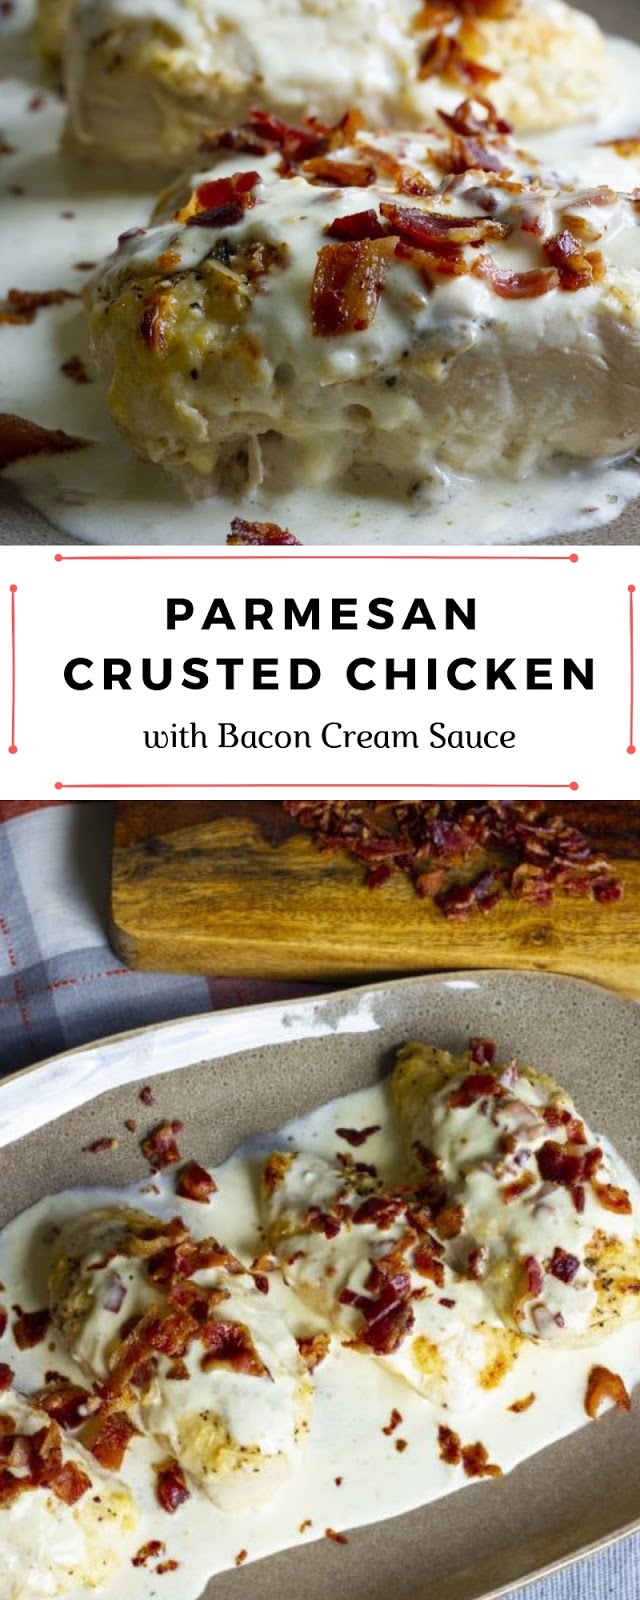 Parmesan Crusted Chicken with Bacon Cream Sauce Recipe